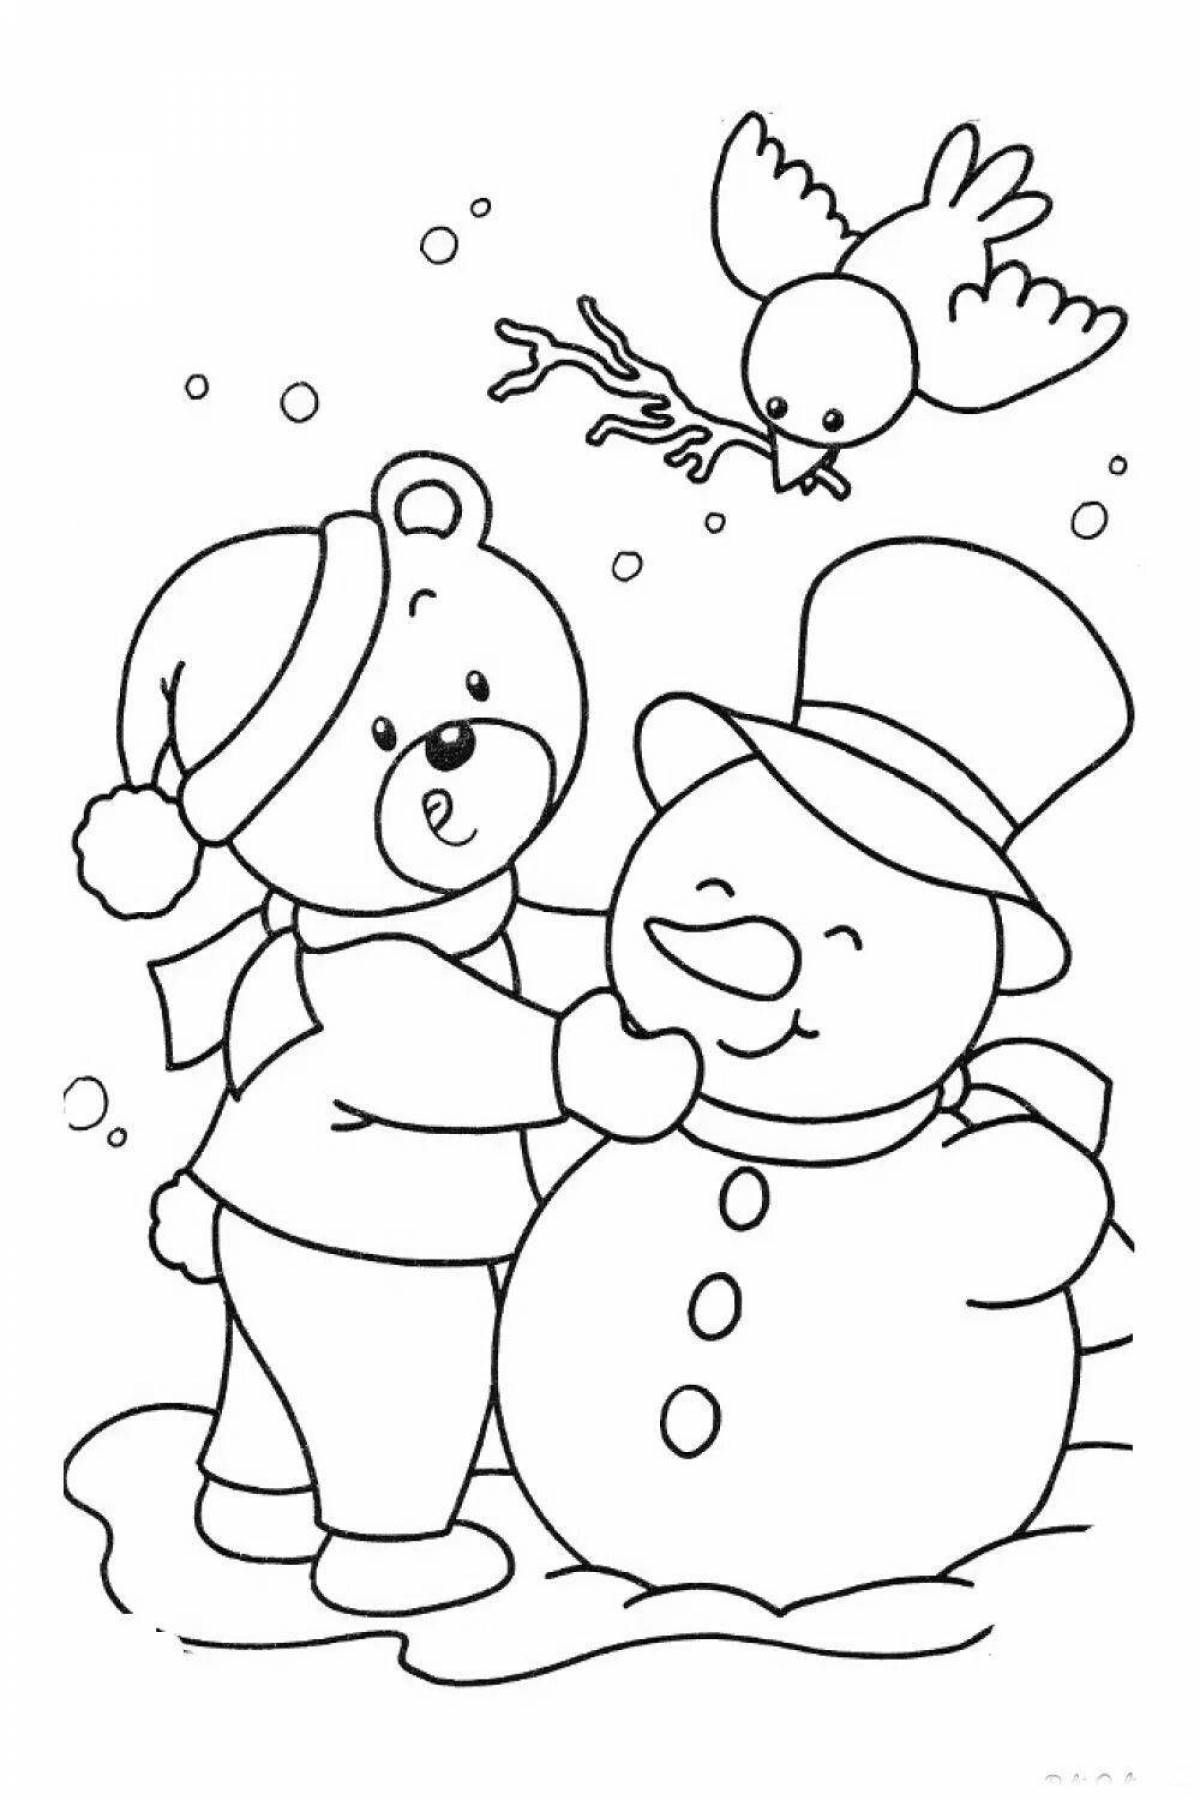 Coloring book shining hare and snowman